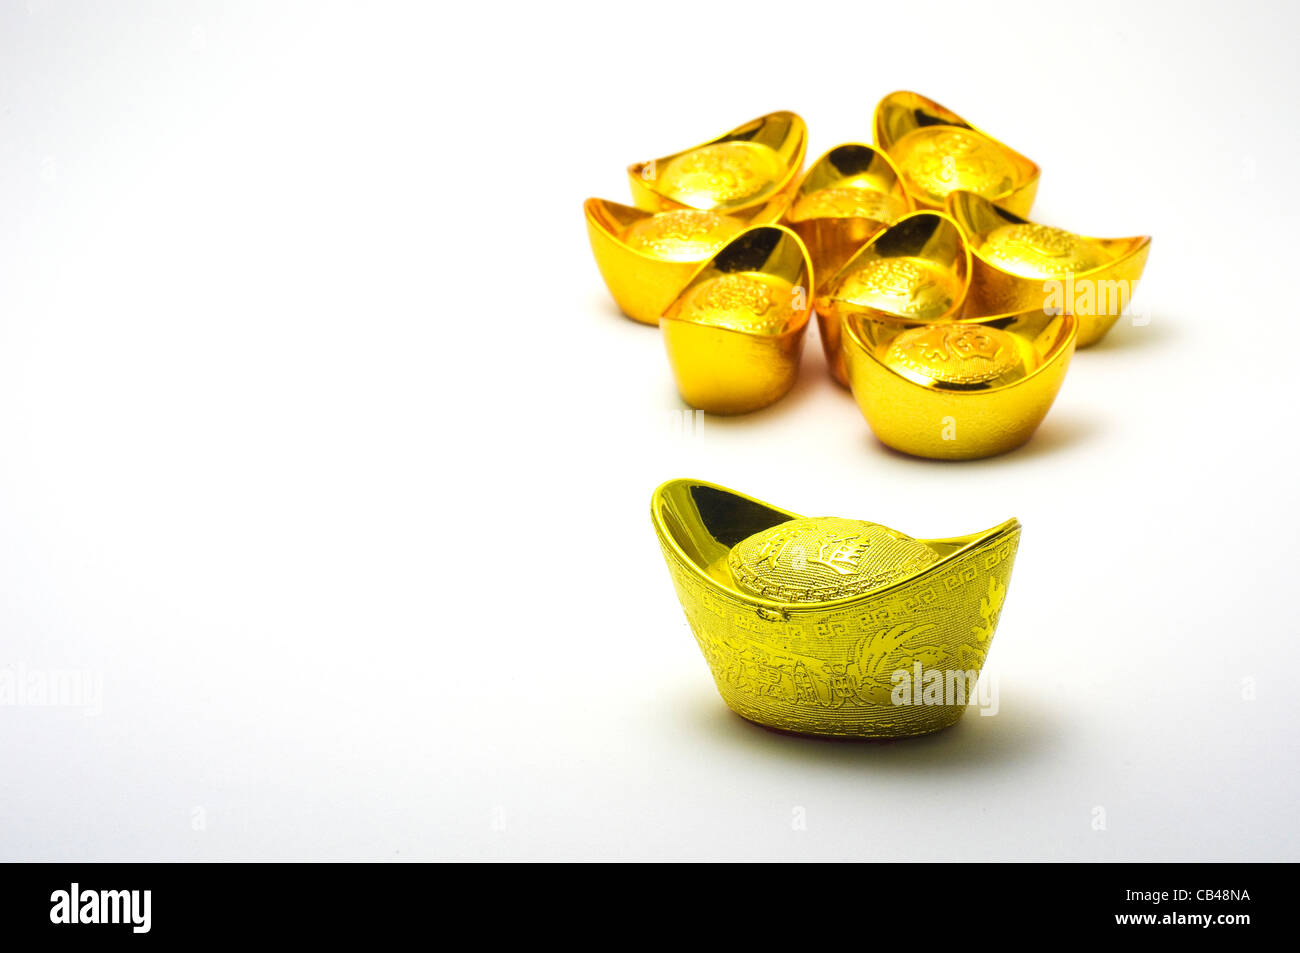 chinese gold ingots, a symbol of wealth for chinese. Stock Photo